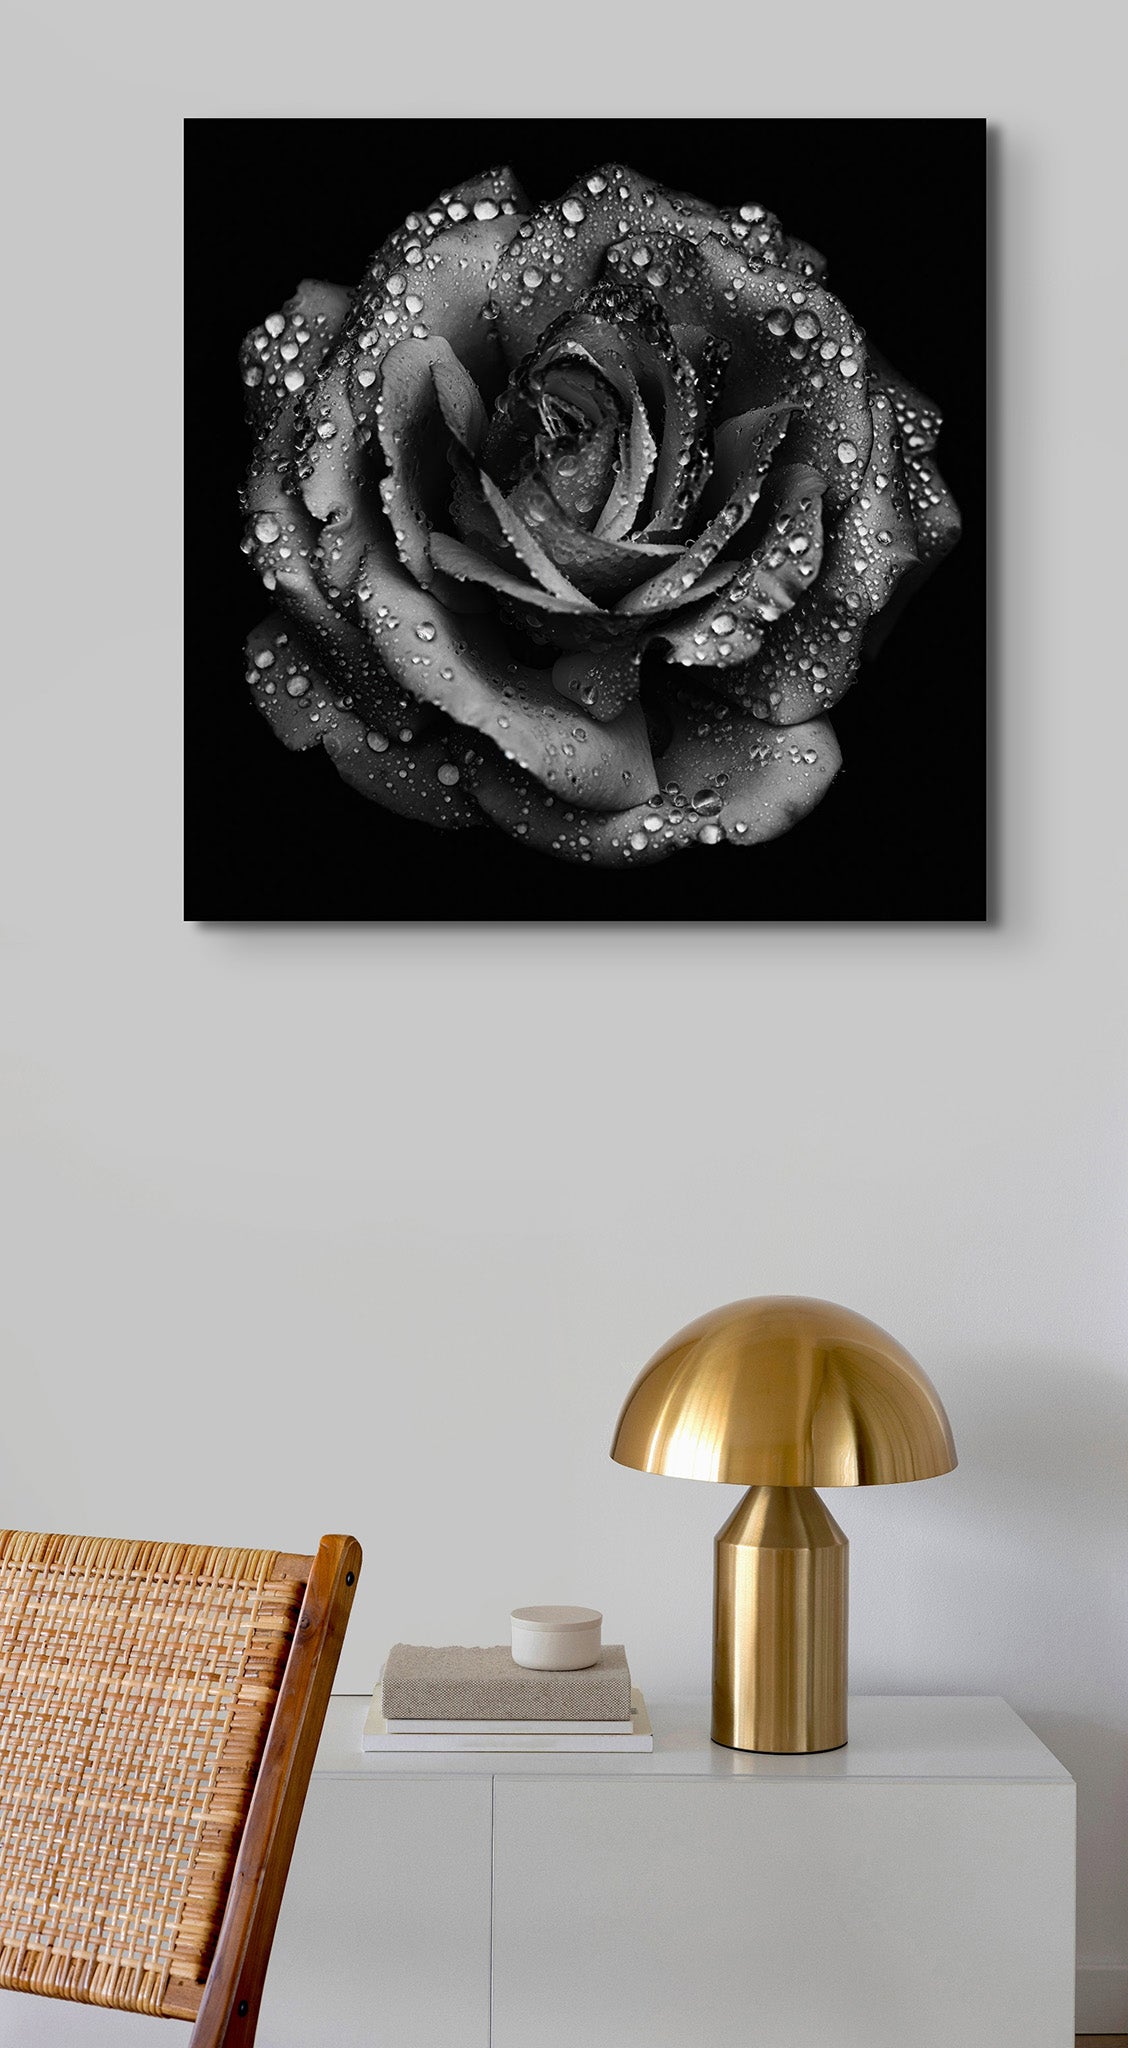 Picture hanging on the wall of the room. There is a gold lamp and a chair in the frame. The picture is a black and white fine art photograph of a rose by Cameron Dreaux. 